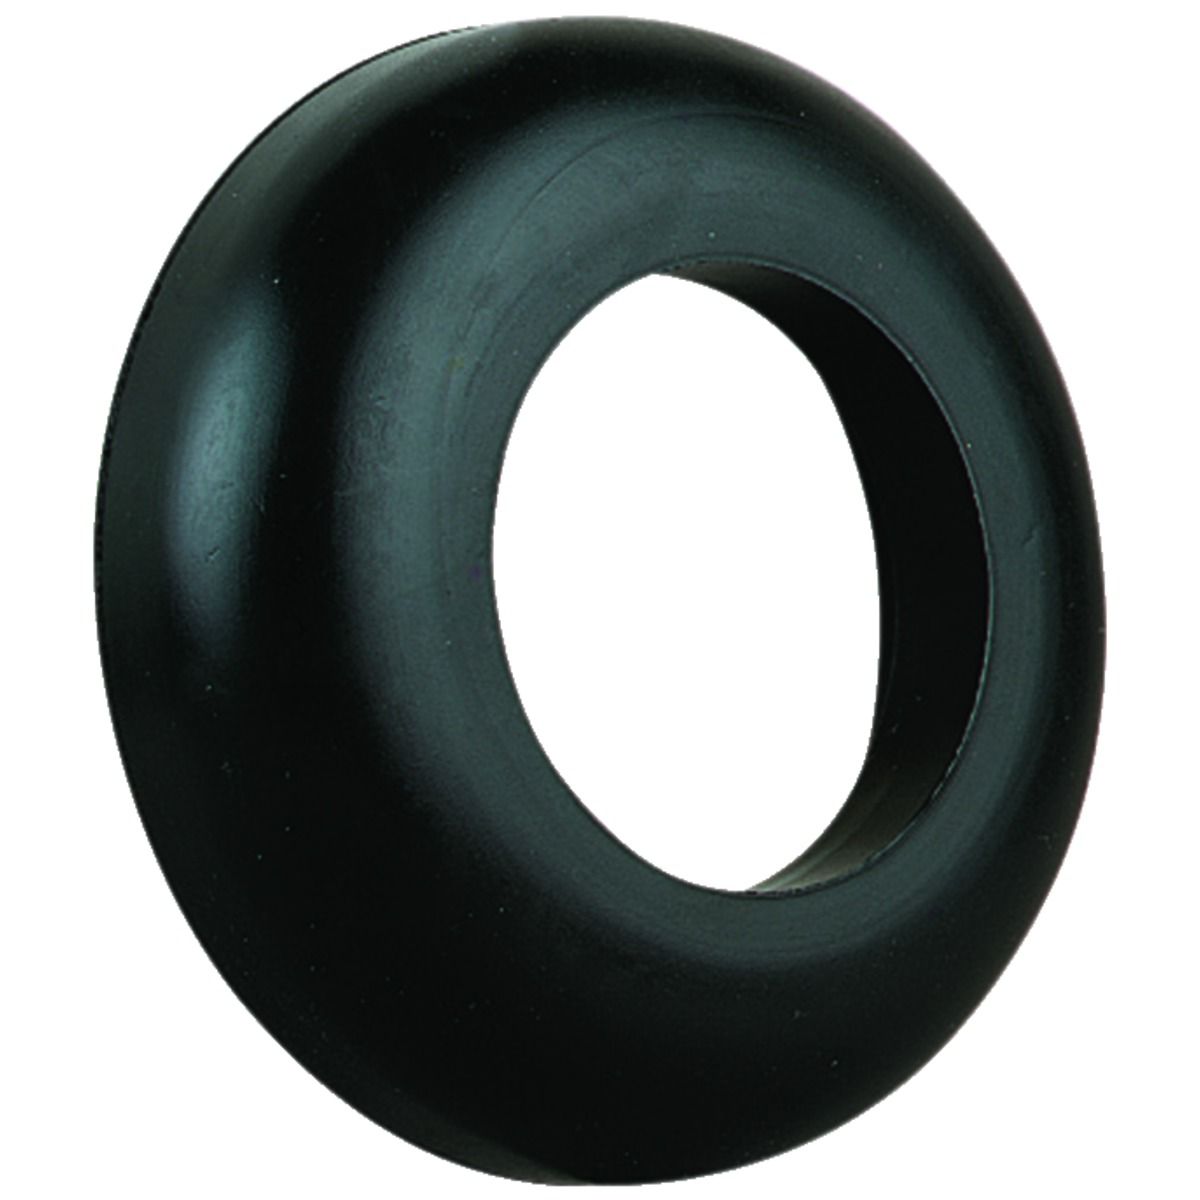 Image of Primaflow Black Doughnut Washer For Close Coupled Toilets - 1.5 Inch